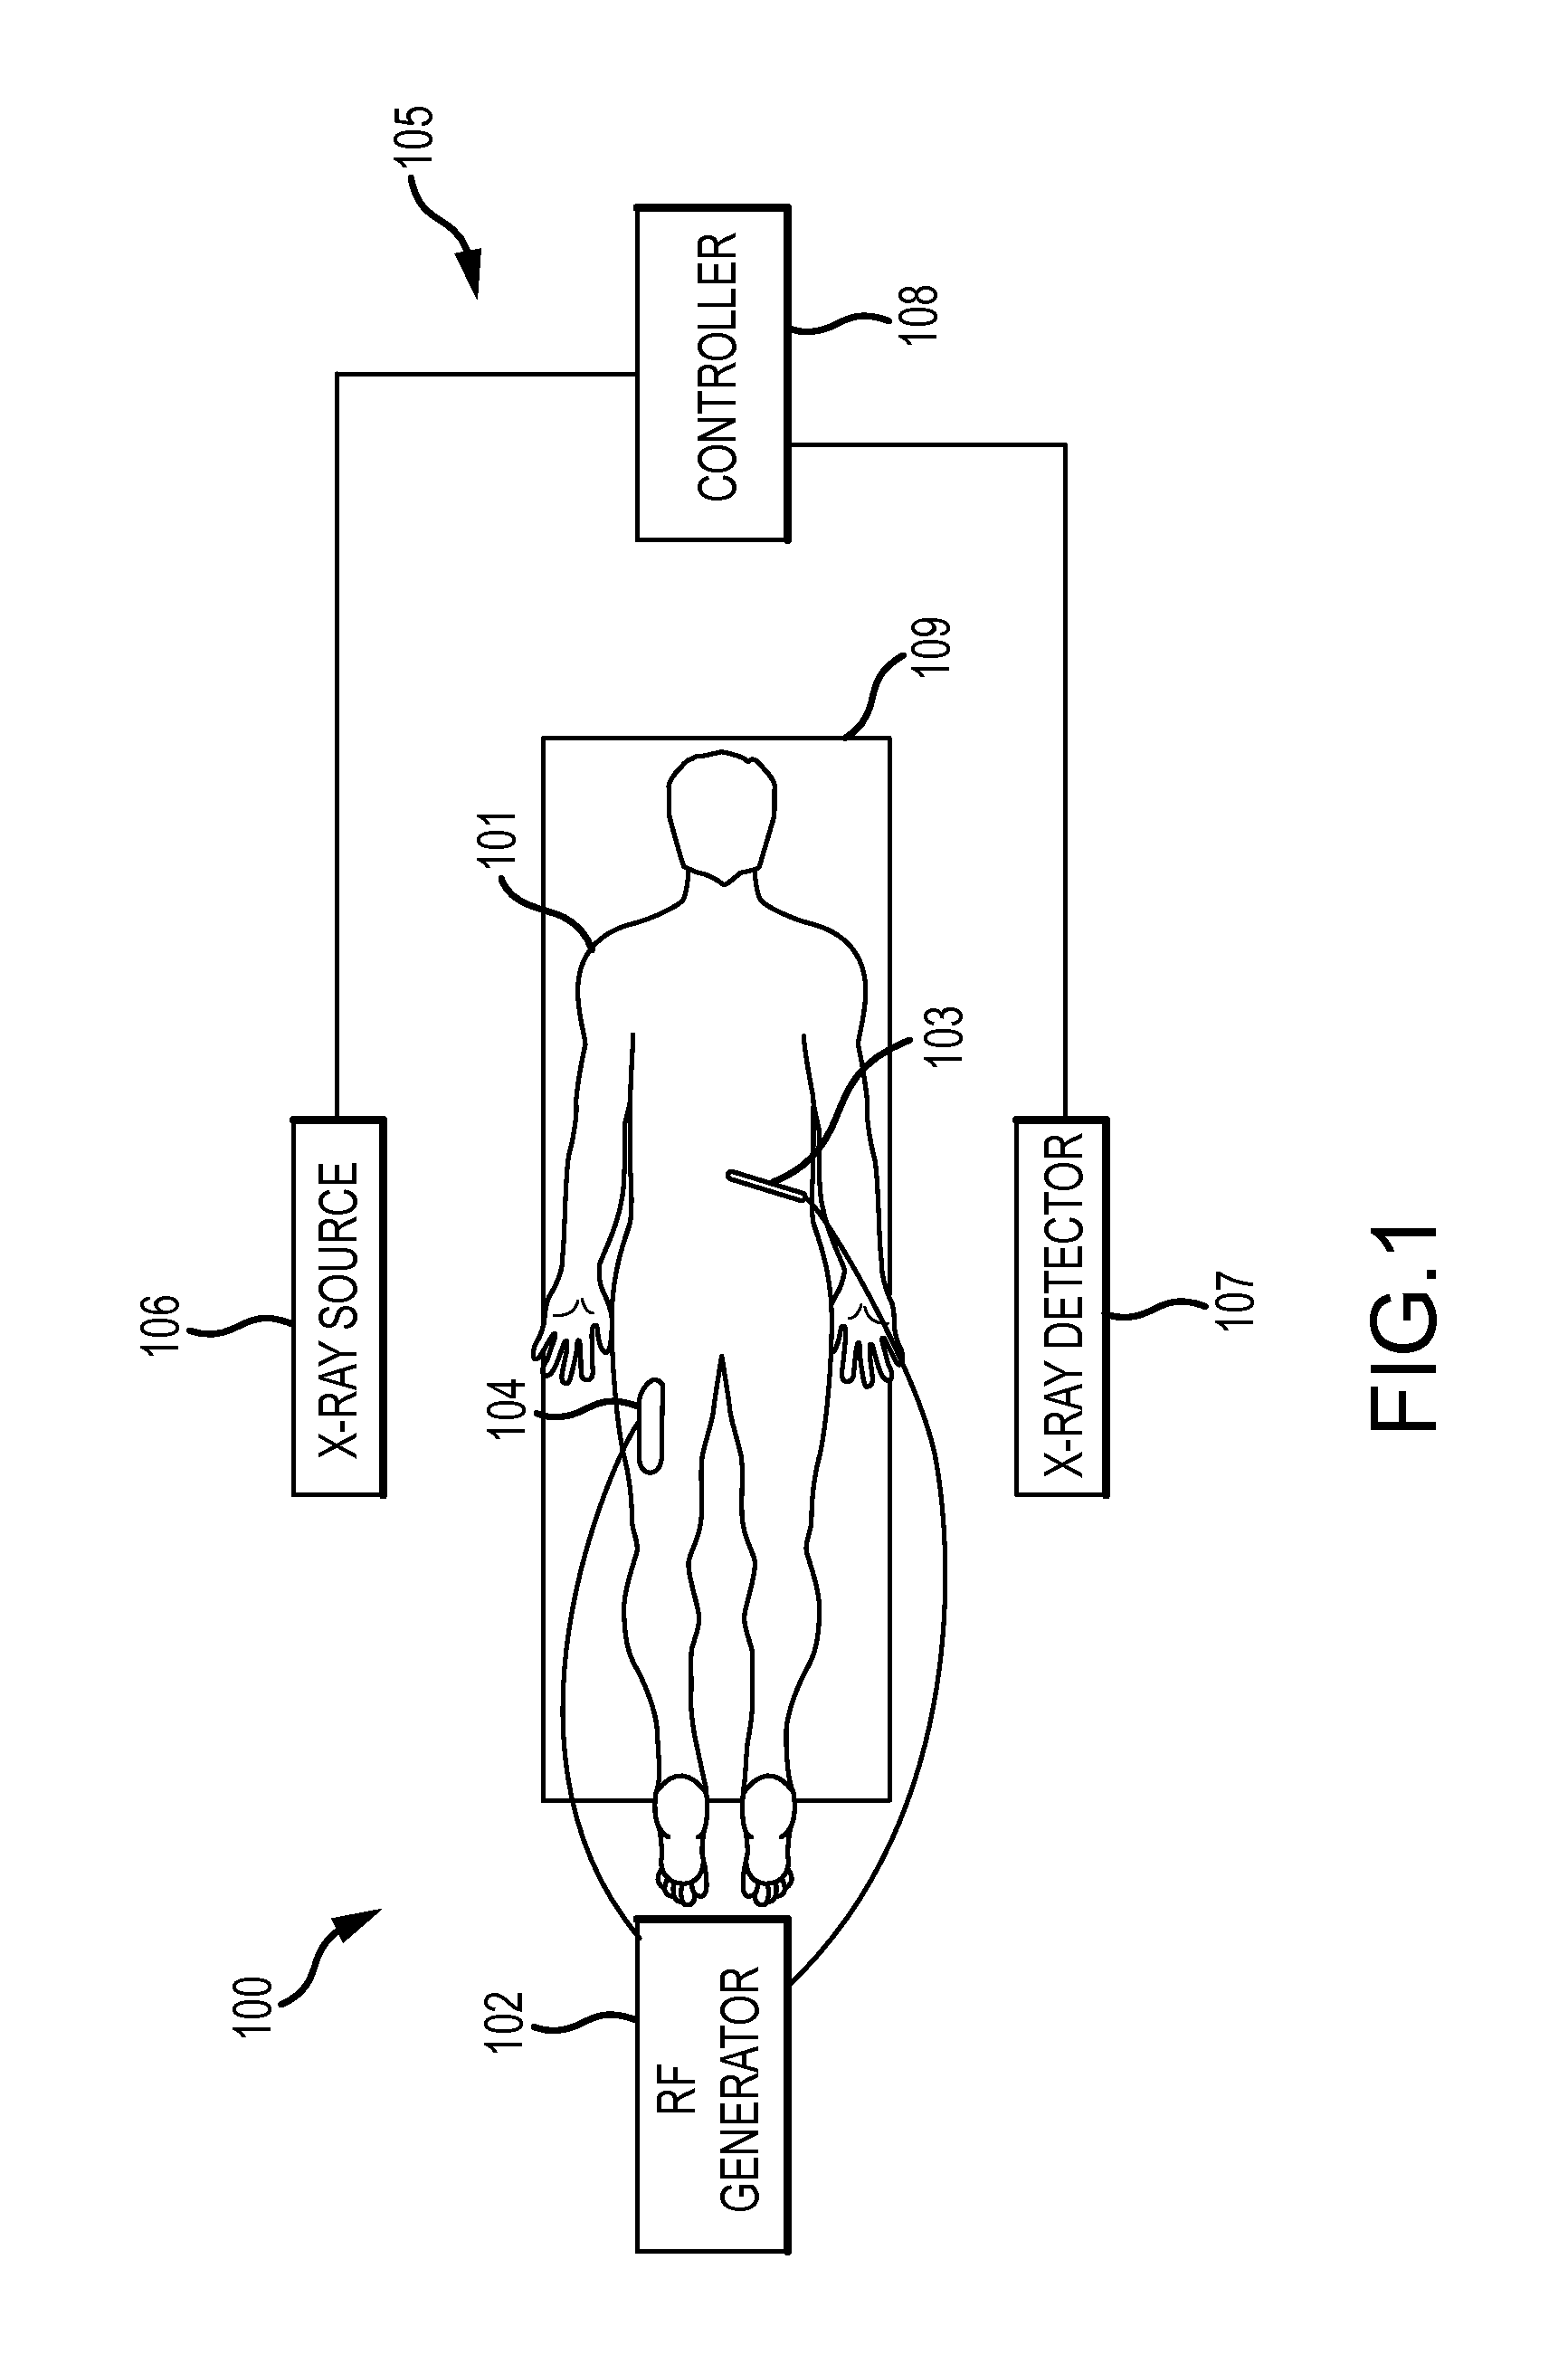 Methods and systems for spinal radio frequency neurotomy